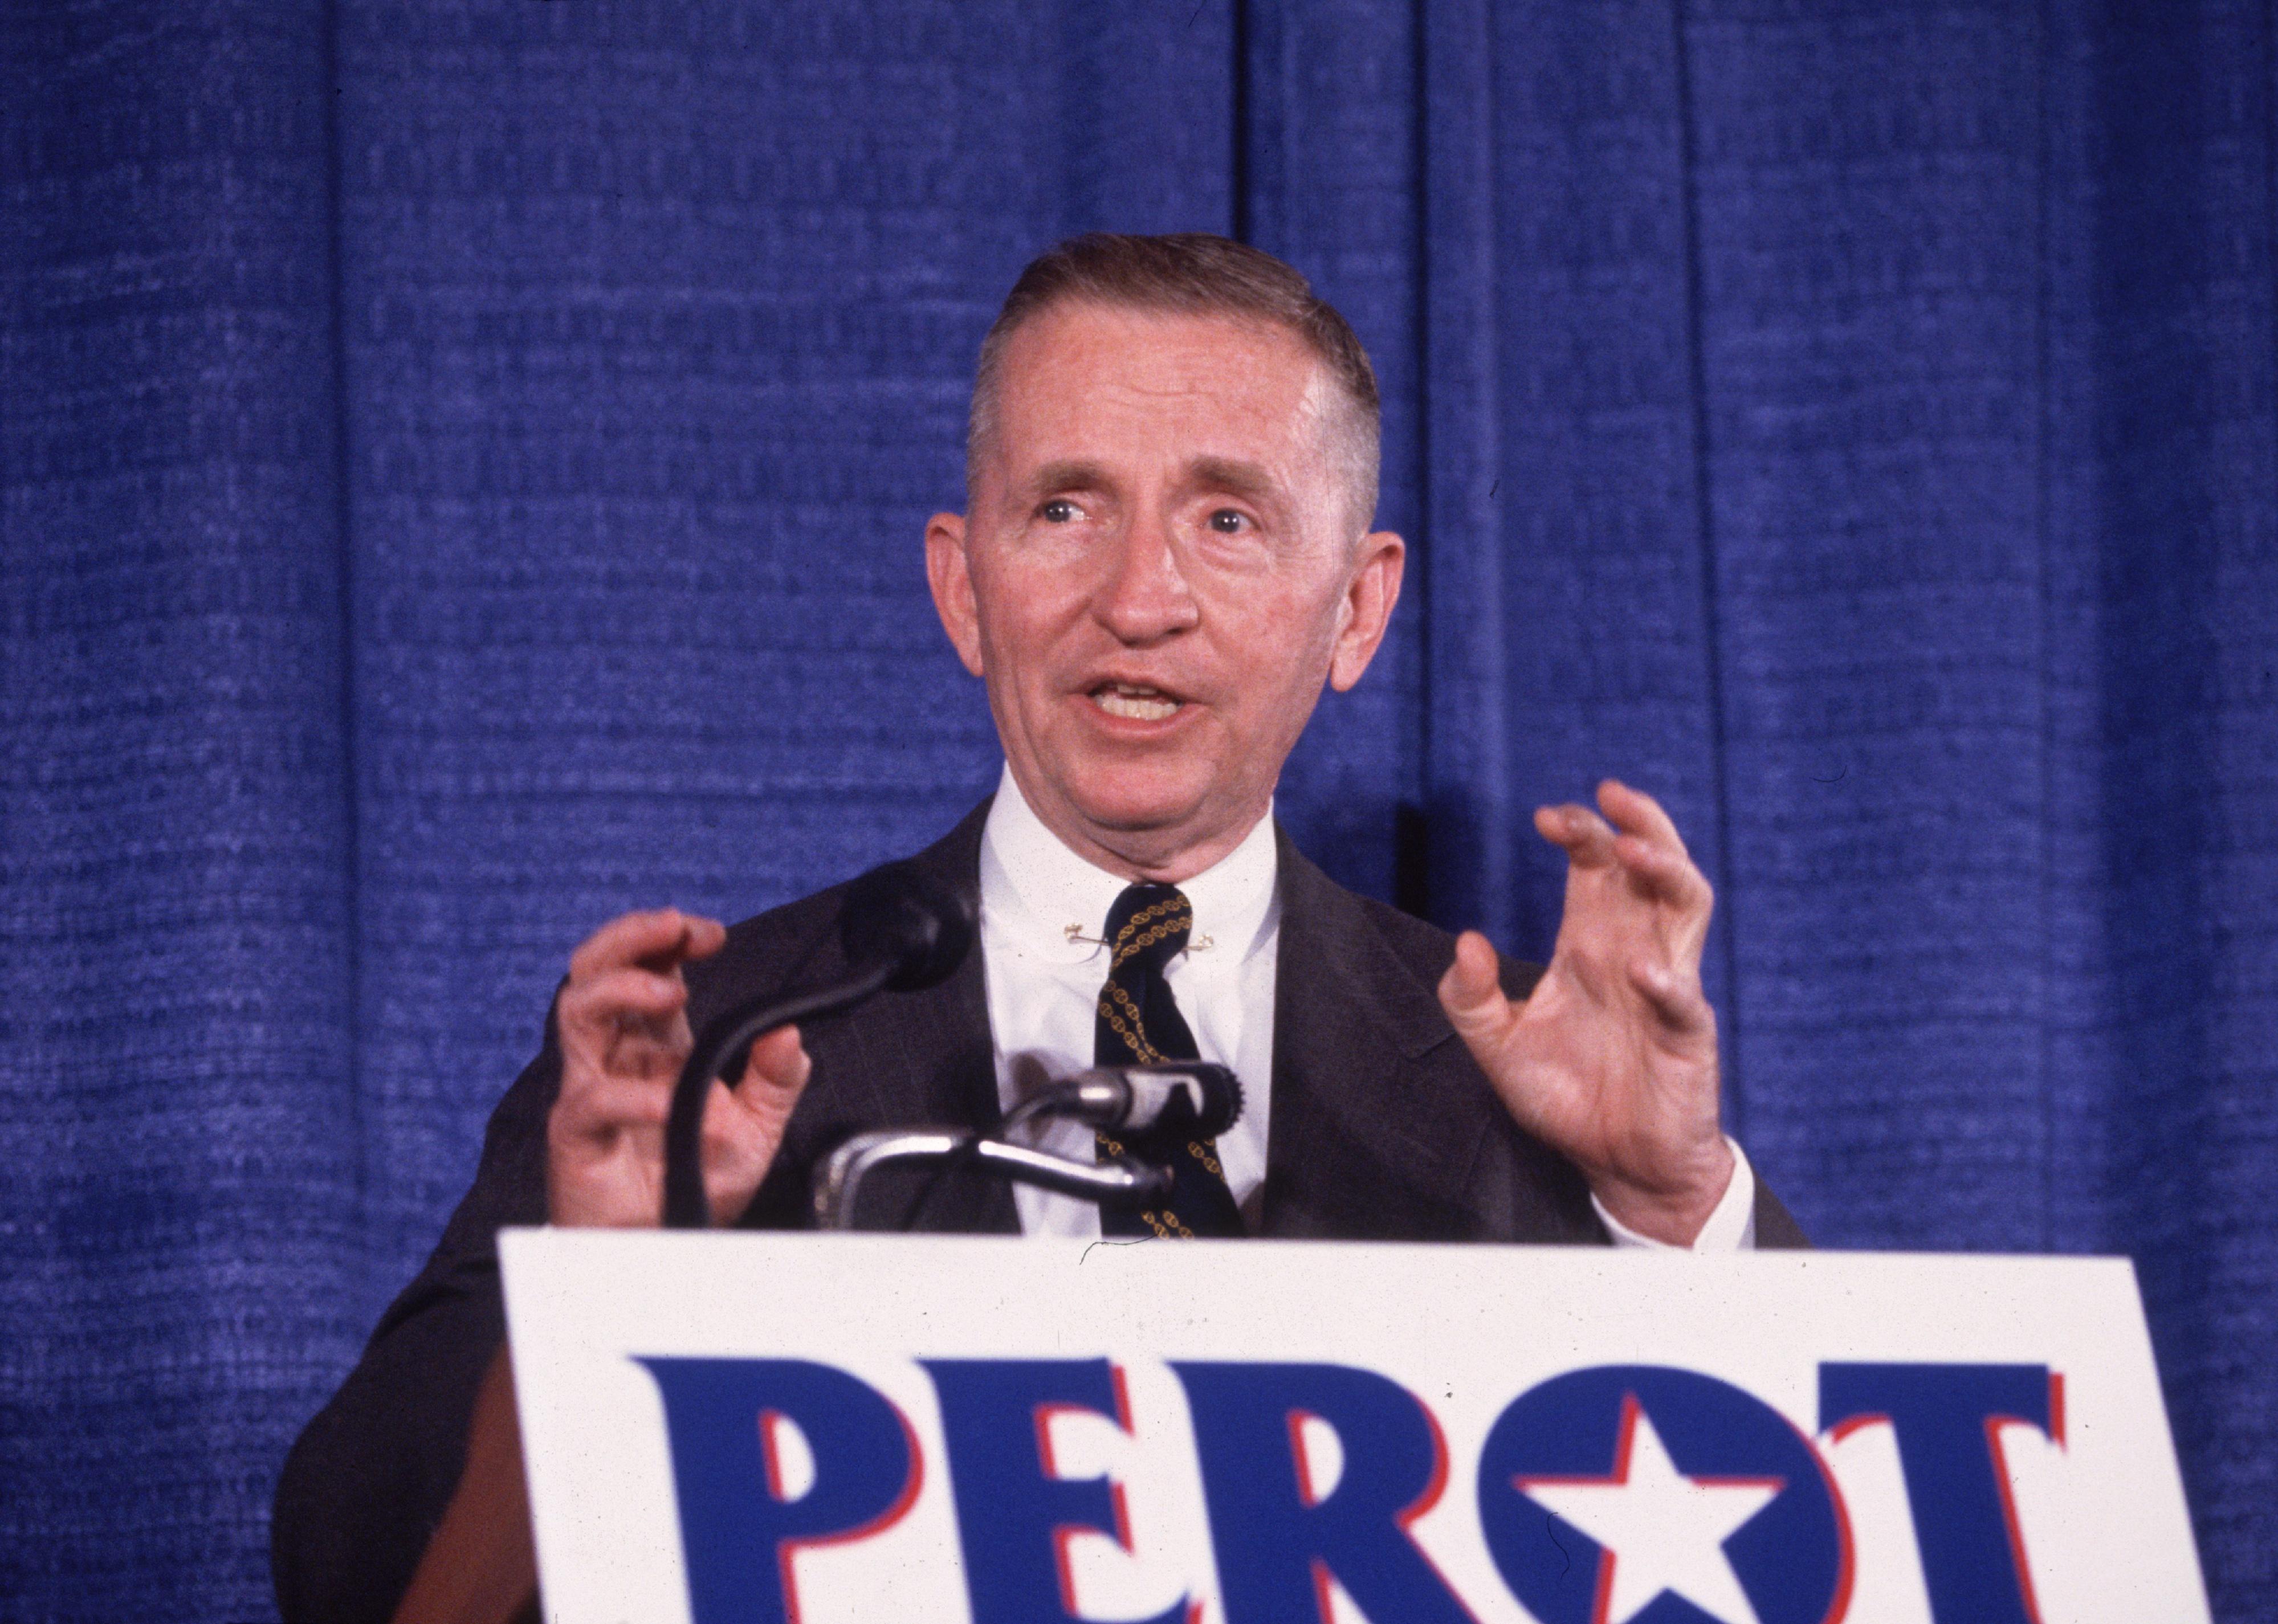 Ross Perot giving a speech onstage.